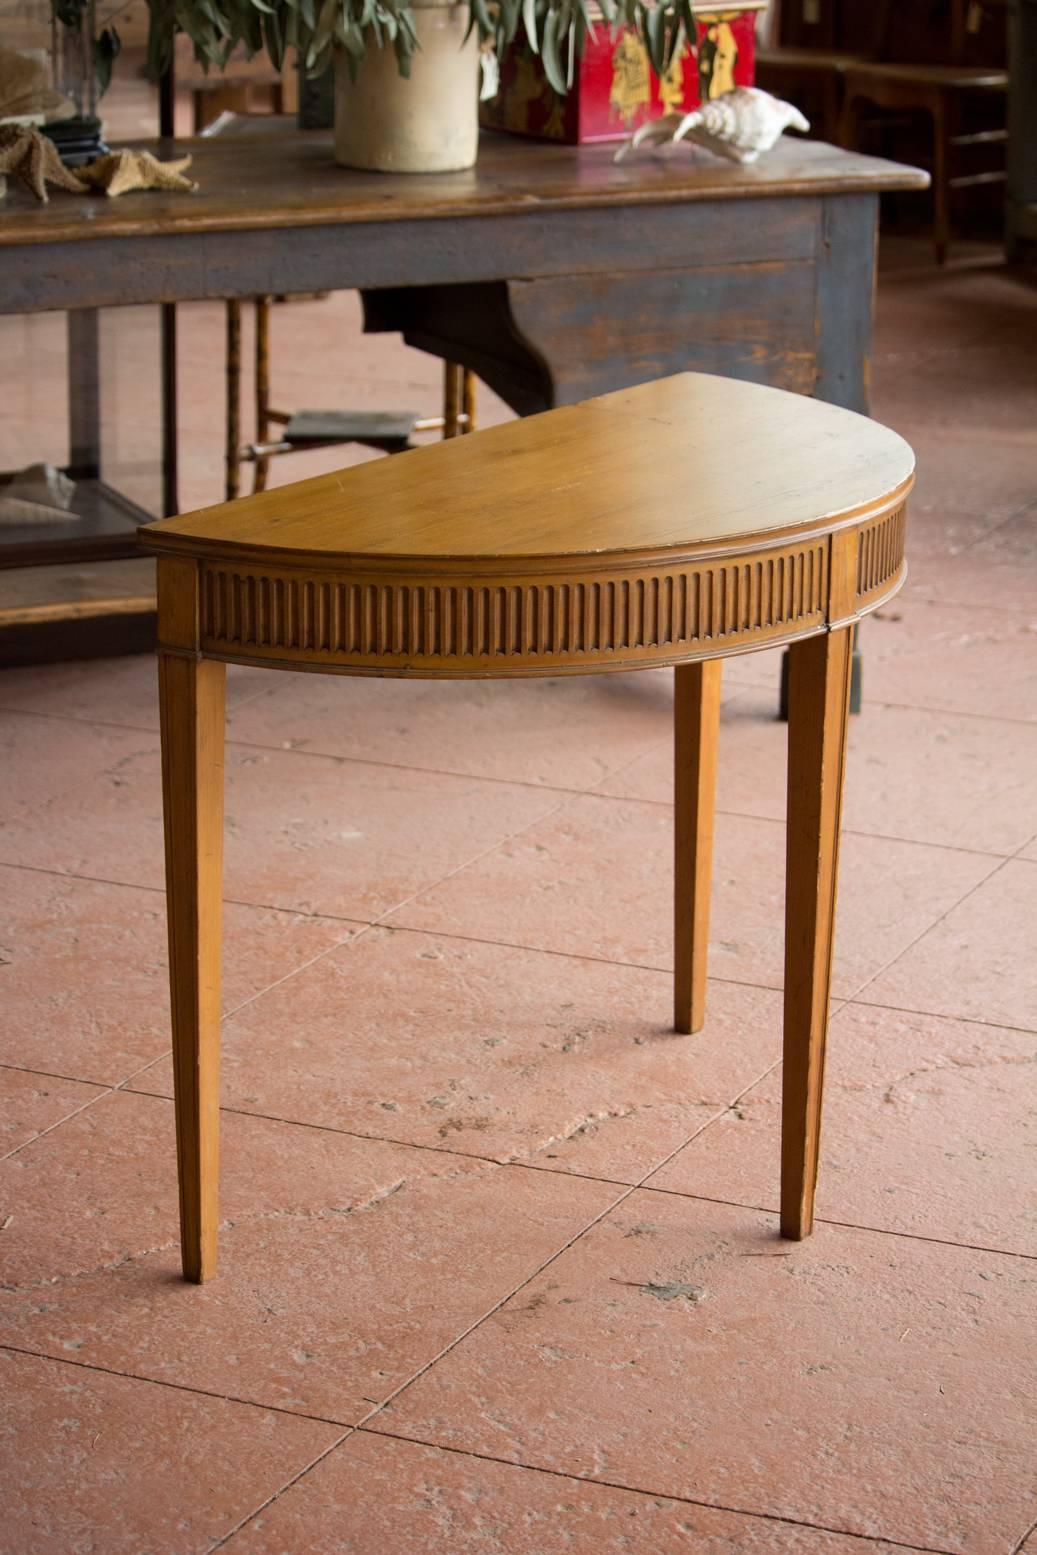 Antique demilune table in the Adam's style, elegant and subtle. Signed by L.G. Plomer.